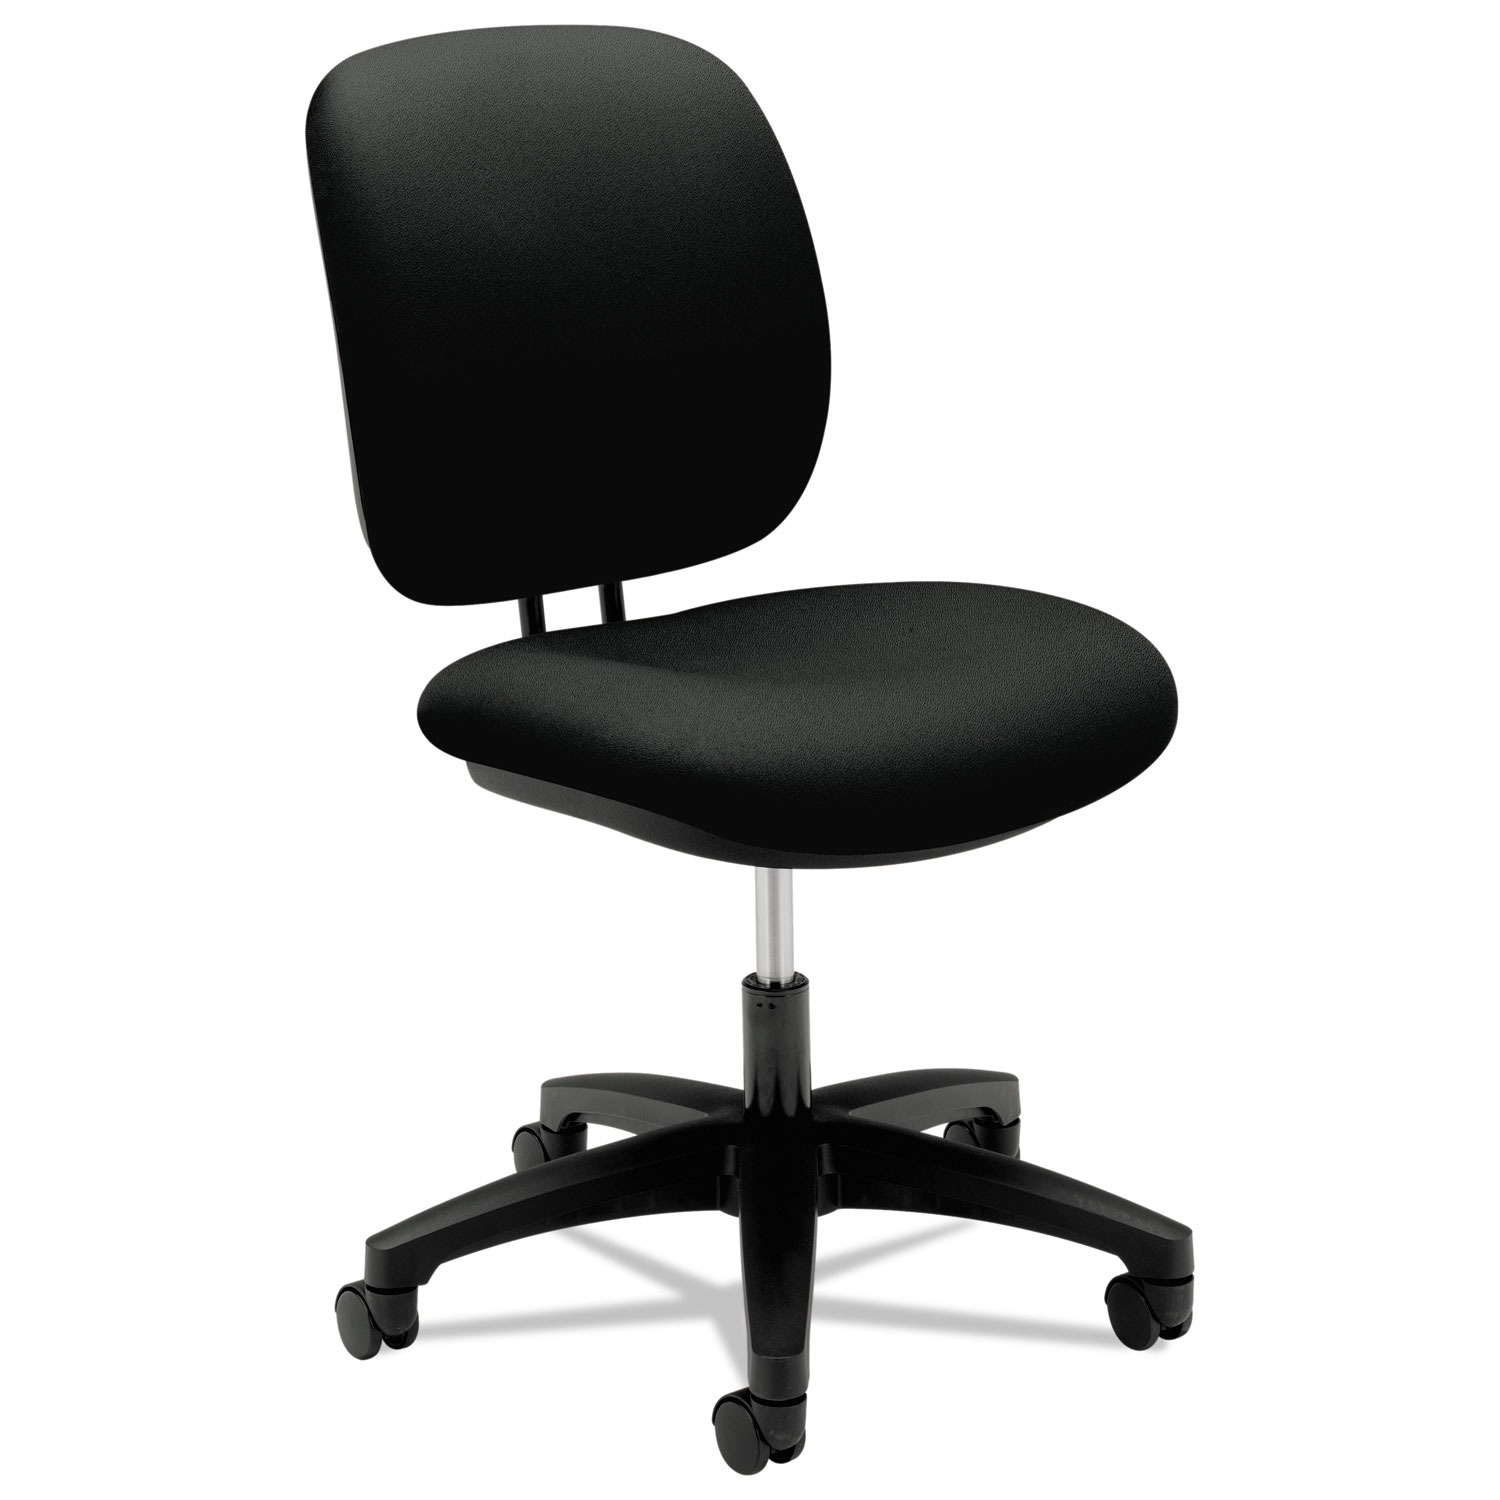  HON H5901.H.CU10.T ComforTask Task Swivel Chair, Supports up to 300 lbs., Black Seat, Black Back, Black Base (HON5901CU10T) 